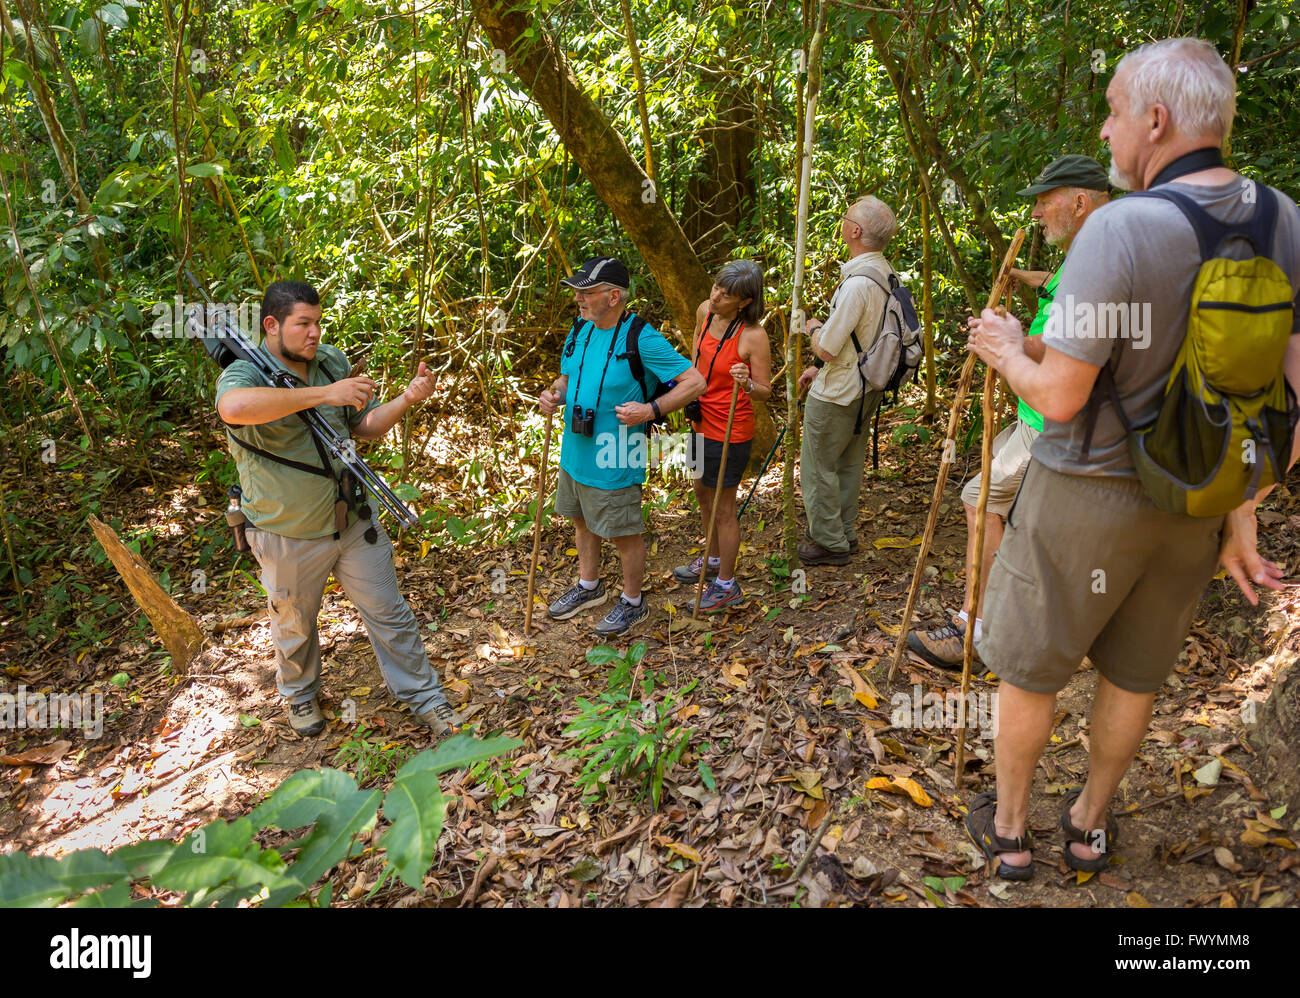 OSA PENINSULA, COSTA RICA - Naturalist guide with eco-tourists in rain forest on hike. Stock Photo